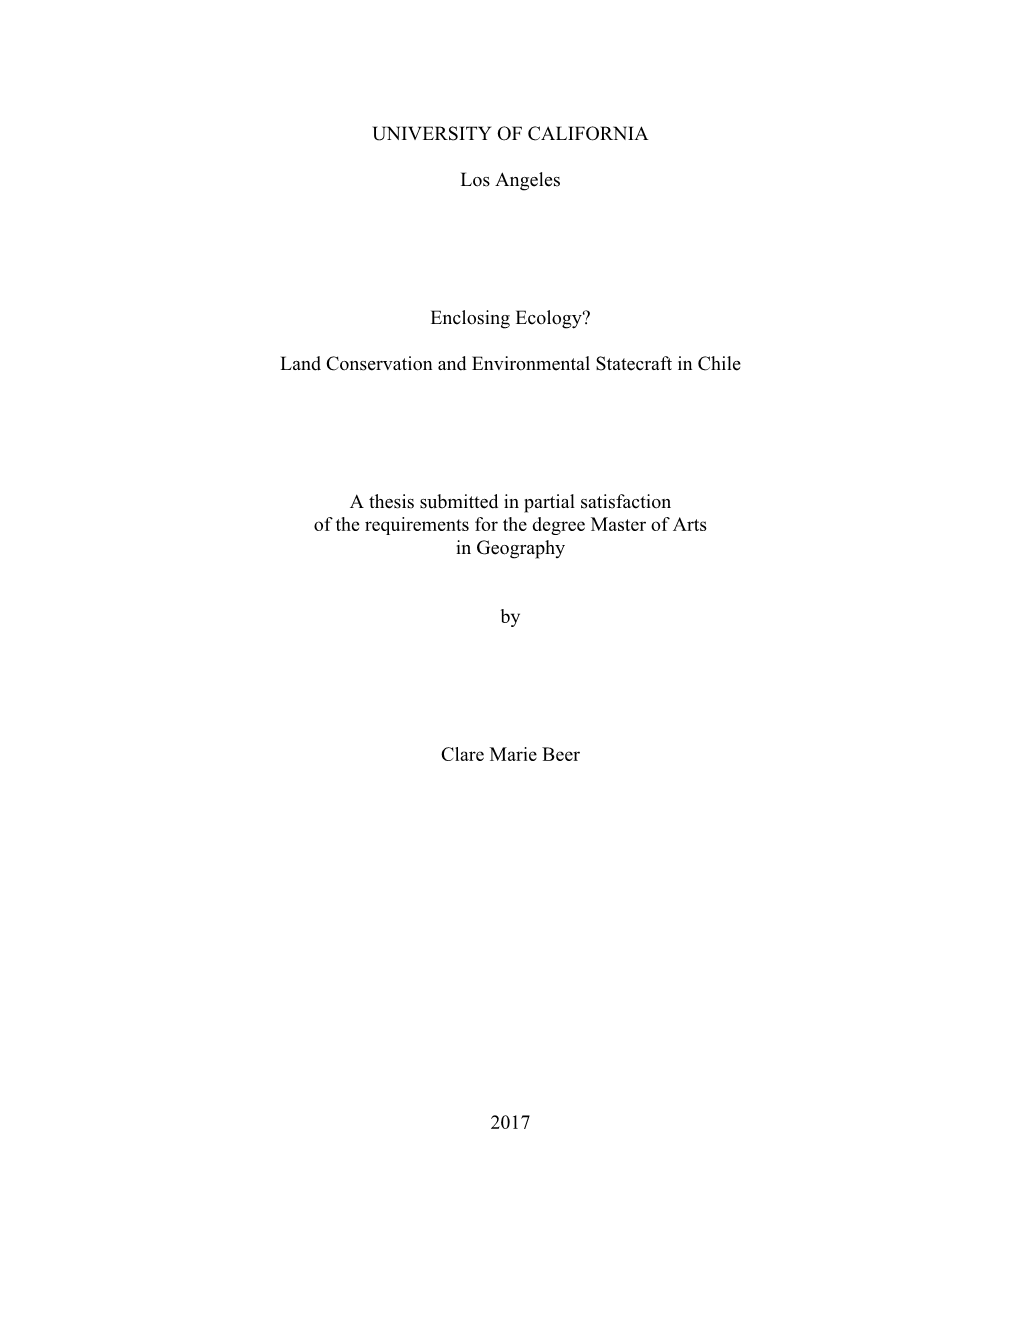 Land Conservation and Environmental Statecraft in Chile a Thesis Submit